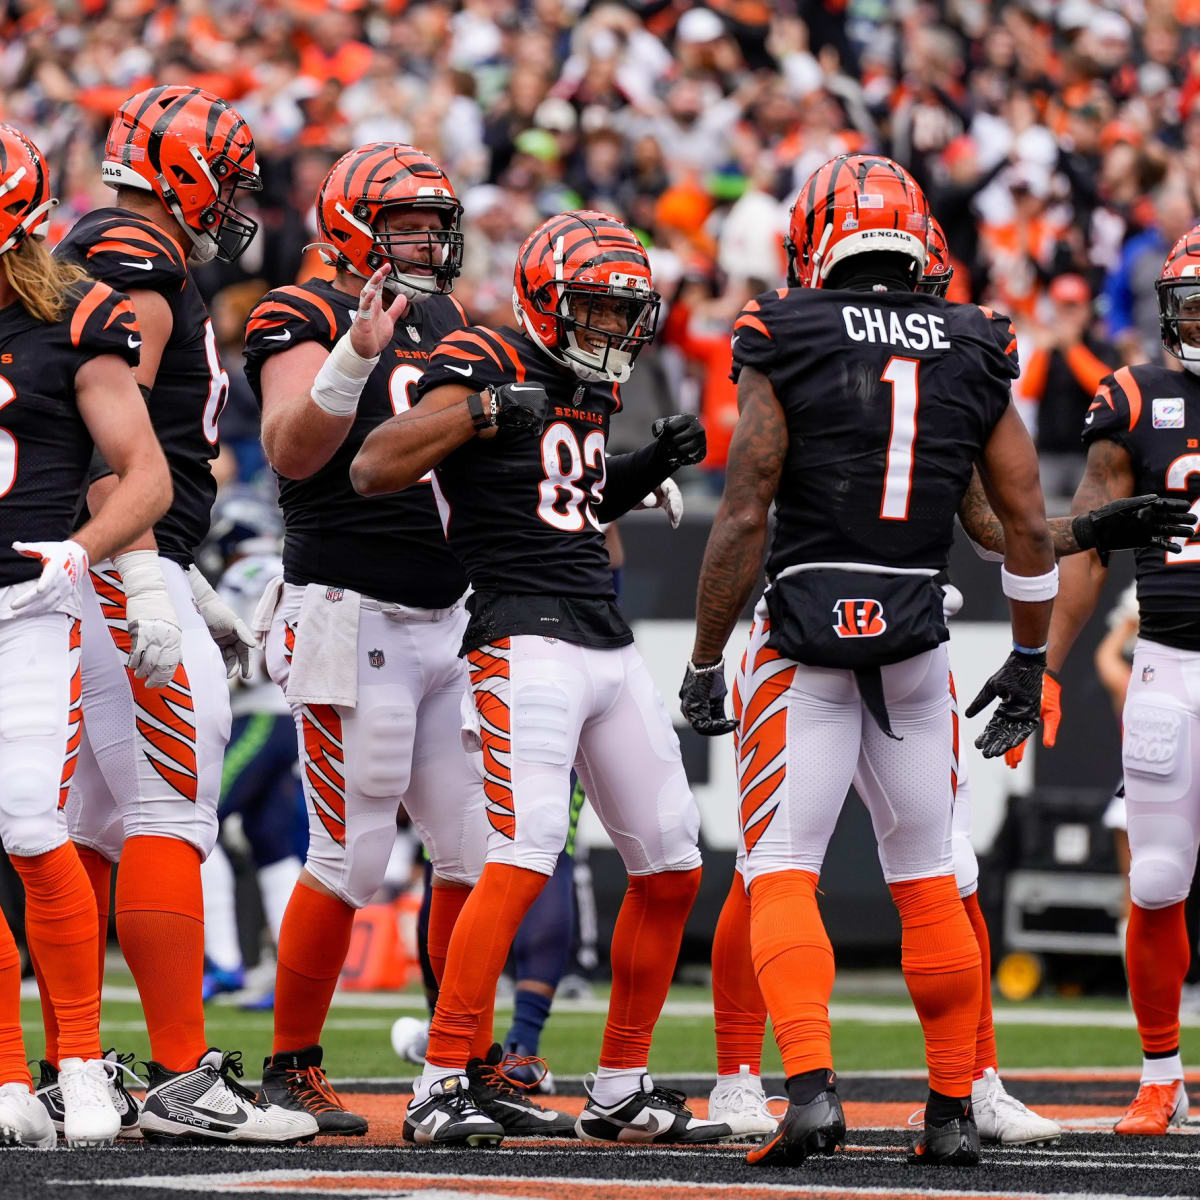 Bengals release uniform schedule for 2020 including two weeks of